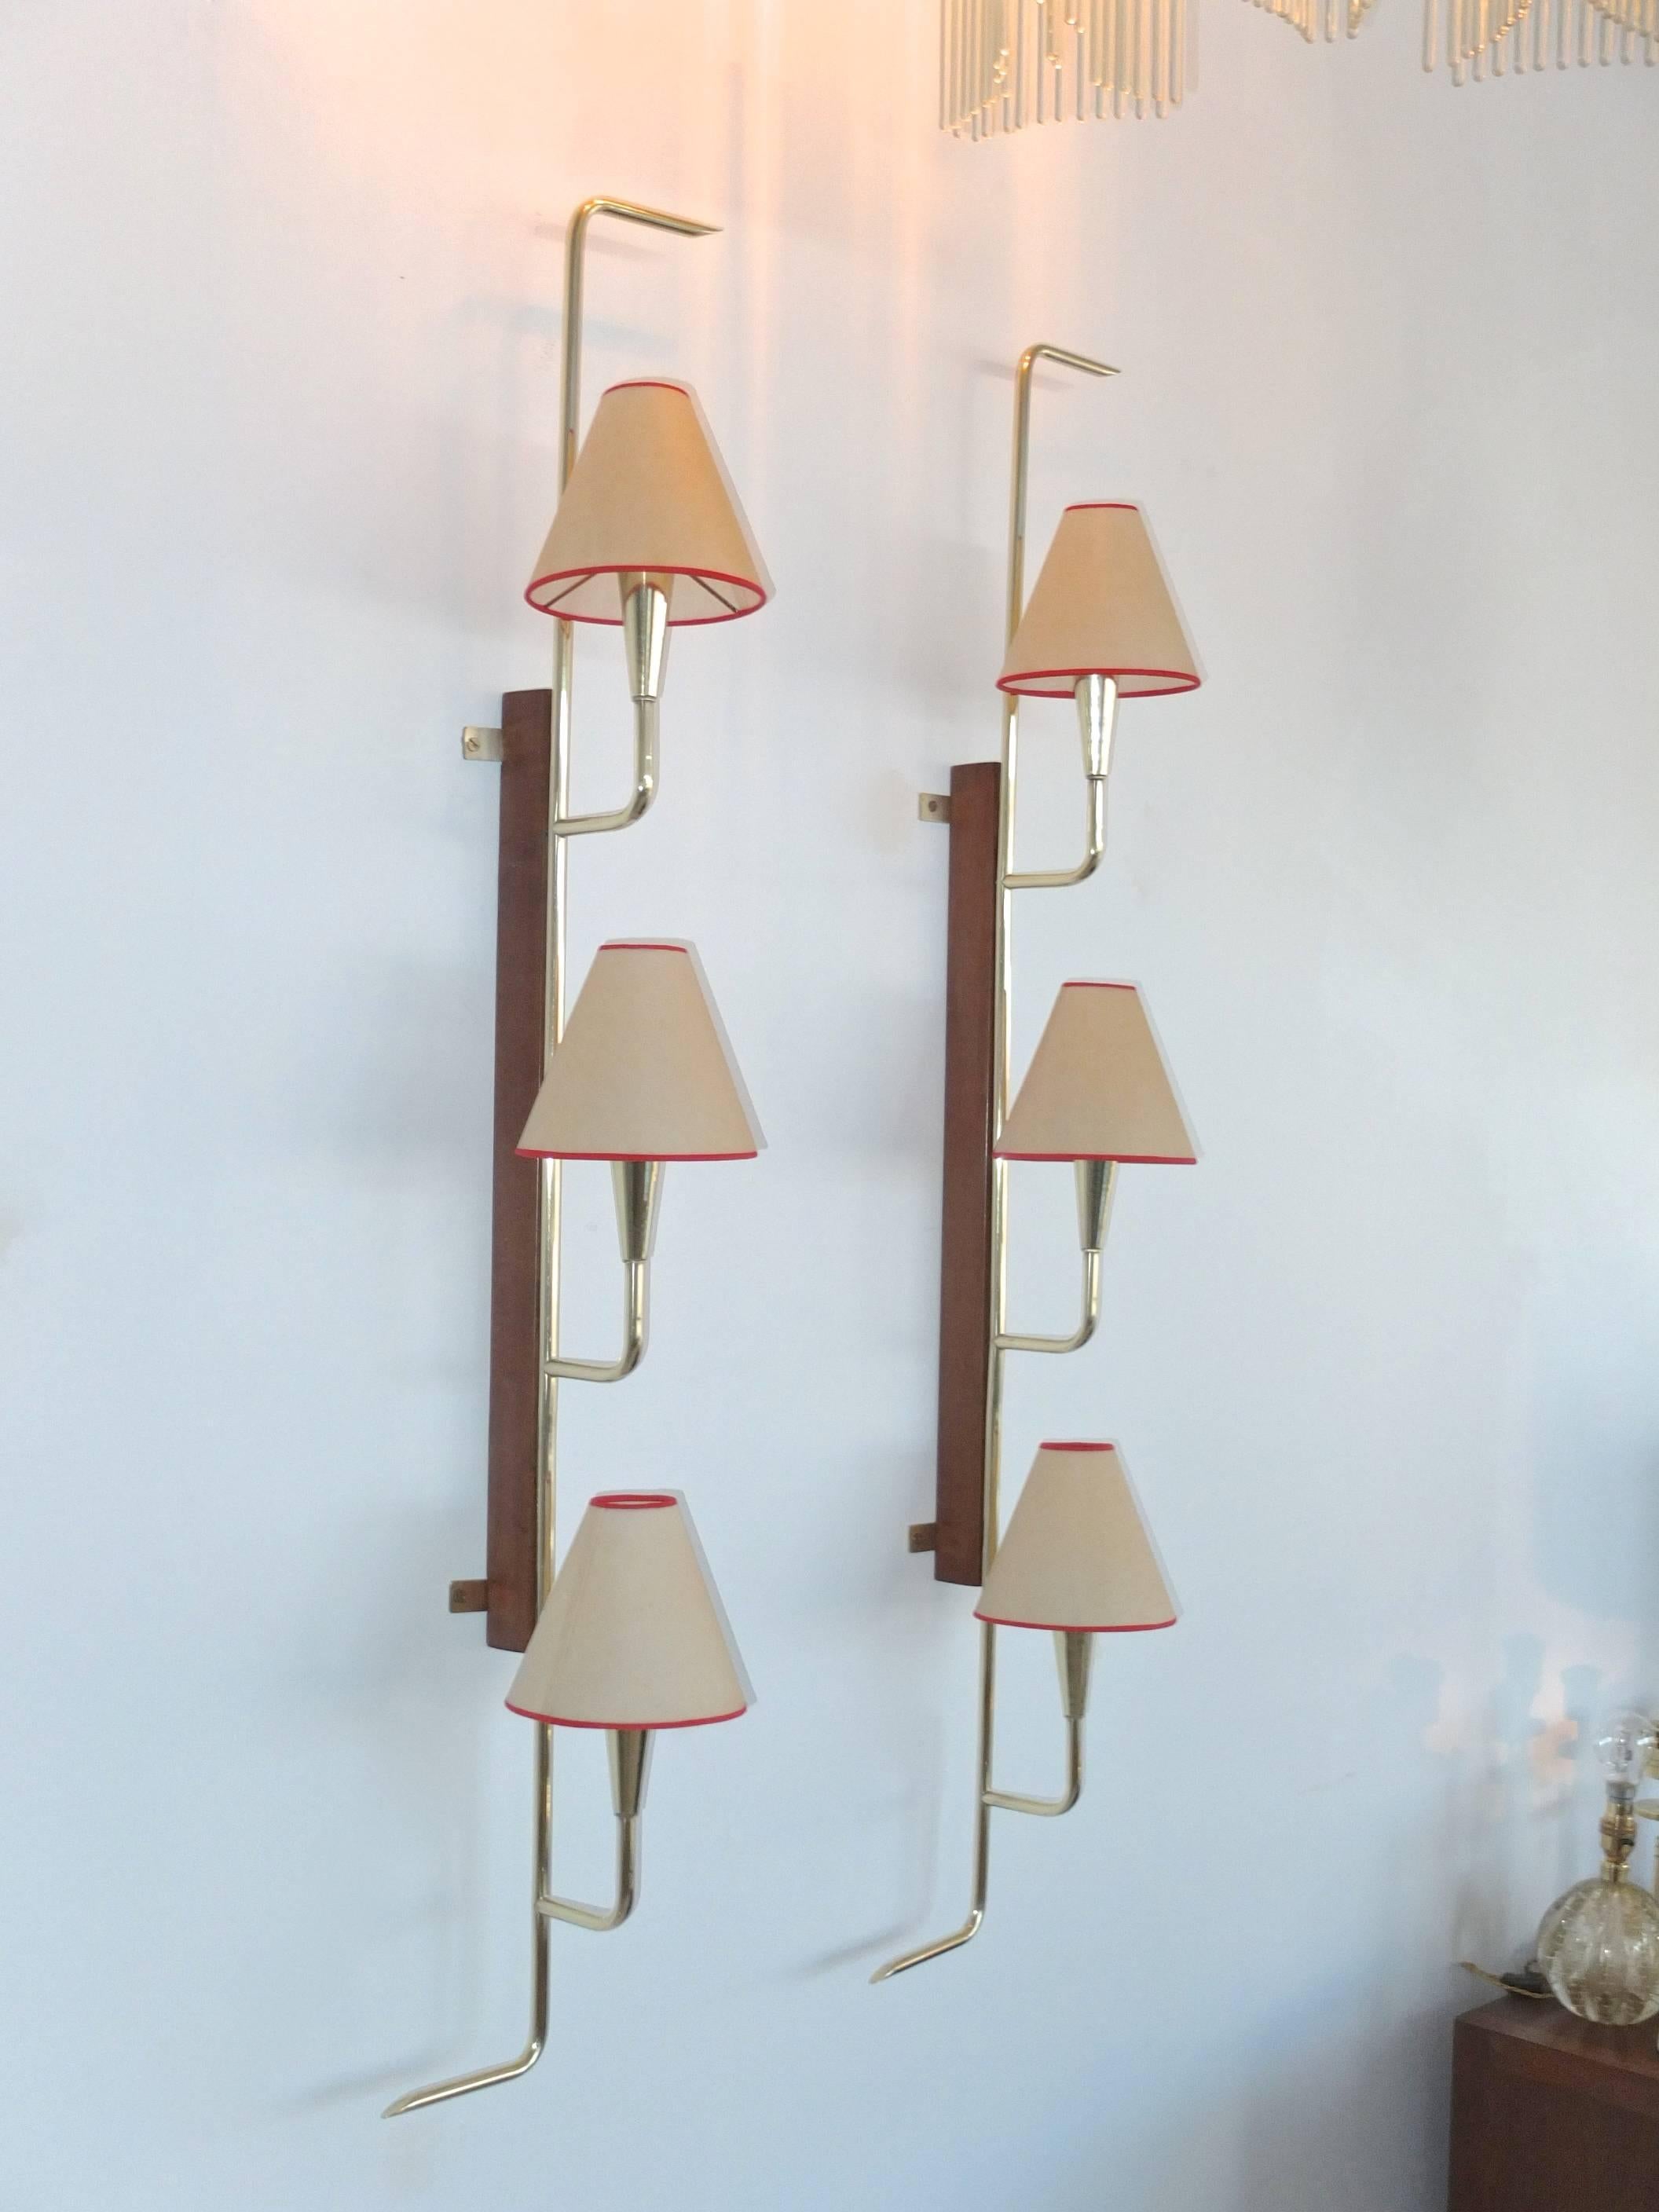 Quality pair of bracket sconces produced in France in the 1950s each with three brass cone socket lights extending from a vertical brass tube finished on top and bottom with right and left pointing finial detail, supported by a solid walnut